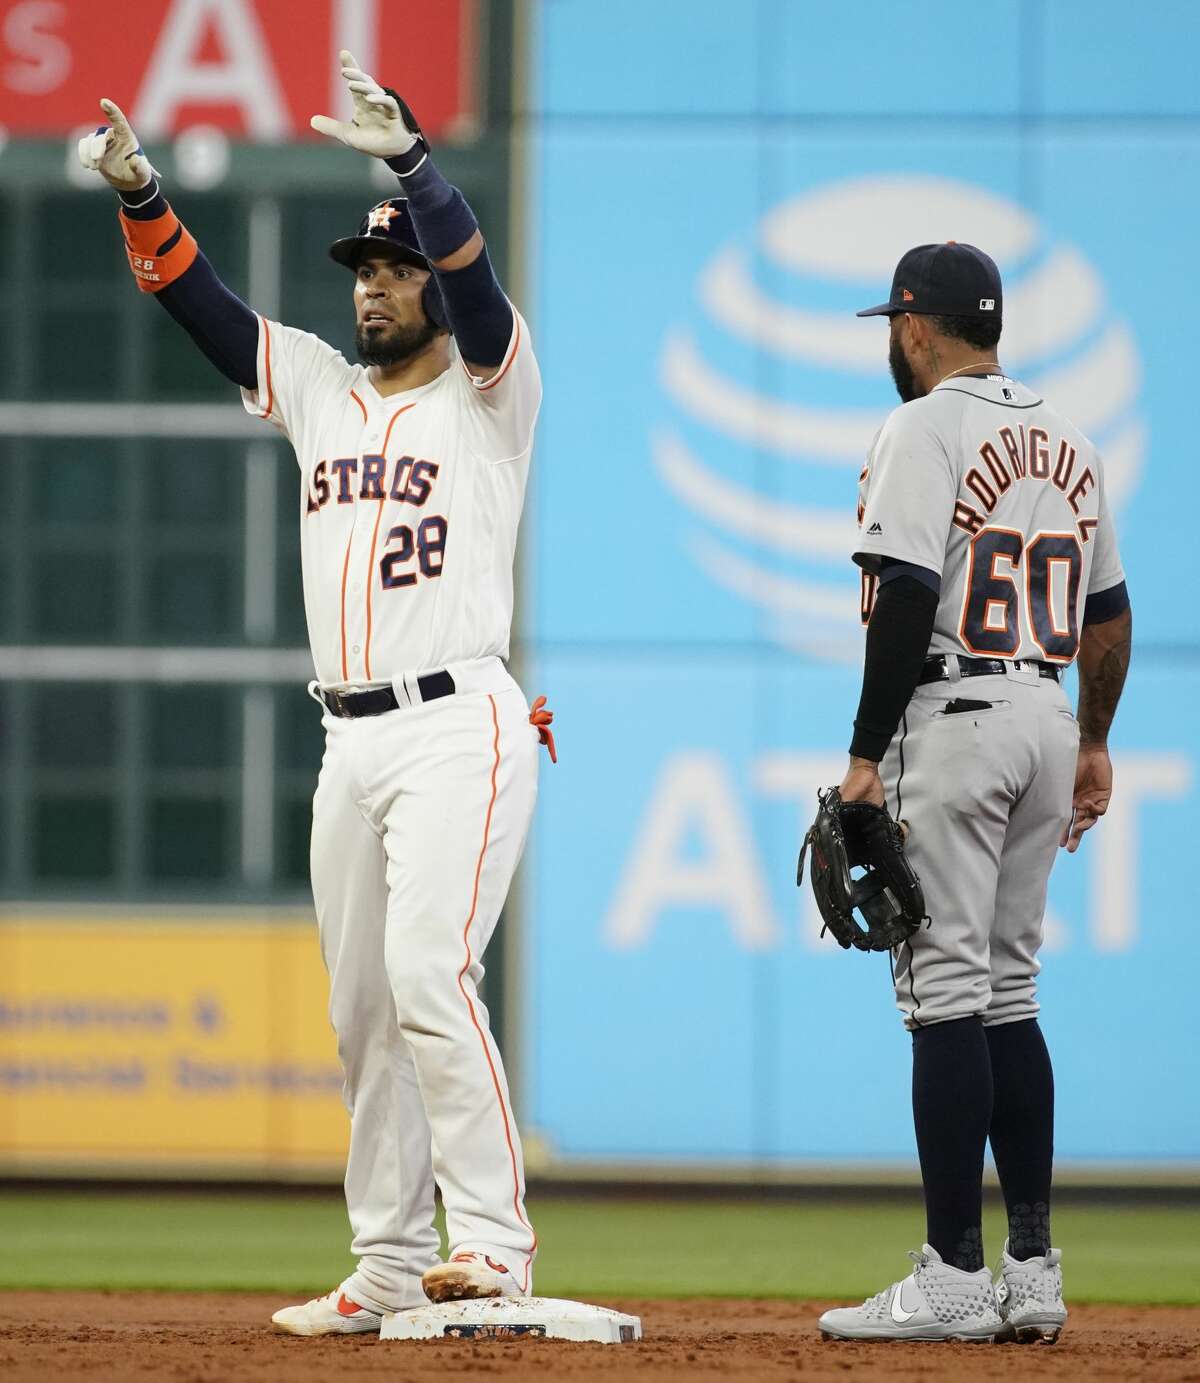 Houston Astros Robinson Chirinos raises his hands as he stands at second base with Detroit Tigers Ronny Rodriguez during the first inning of MLB game at Minute Maid Park Monday, Aug. 19, 2019, in Houston. Robinson Chirinos got to second base on a fielding error by left fielder Brandon Dixon.